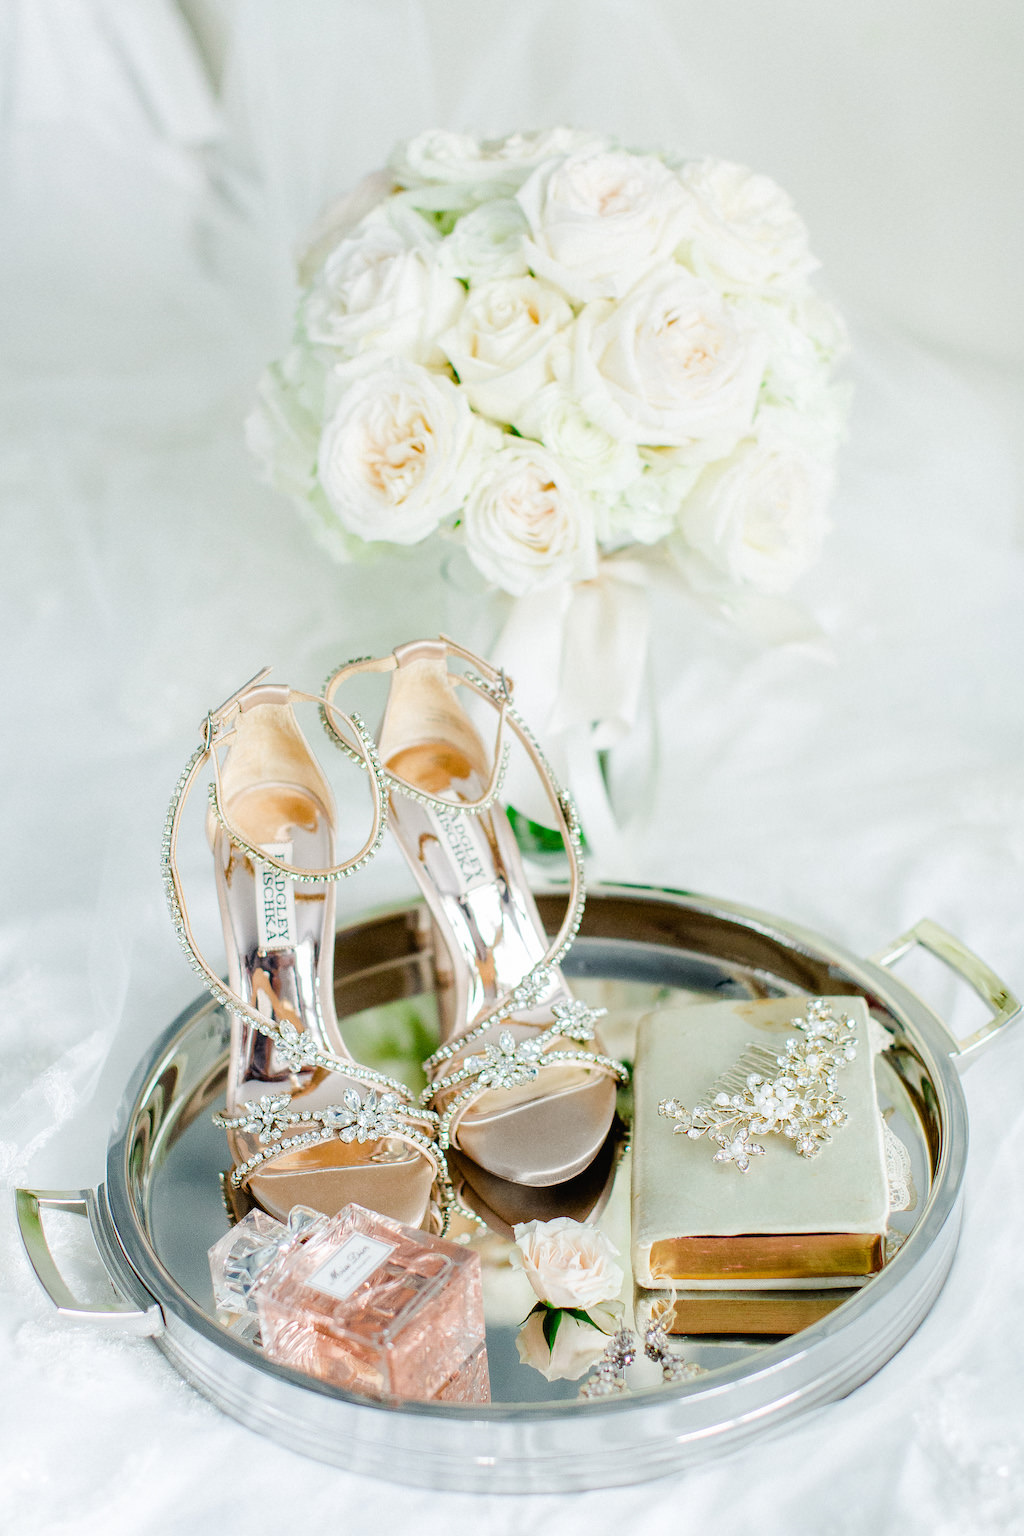 Rose Gold Strappy Rhinestone Badgley Mischka Heel Wedding Shoes, Perfume Bottle, Sage Green Leather Book, Rhinestone Headpiece on Round Mirror Tray and Ivory Rose Floral Bouquet